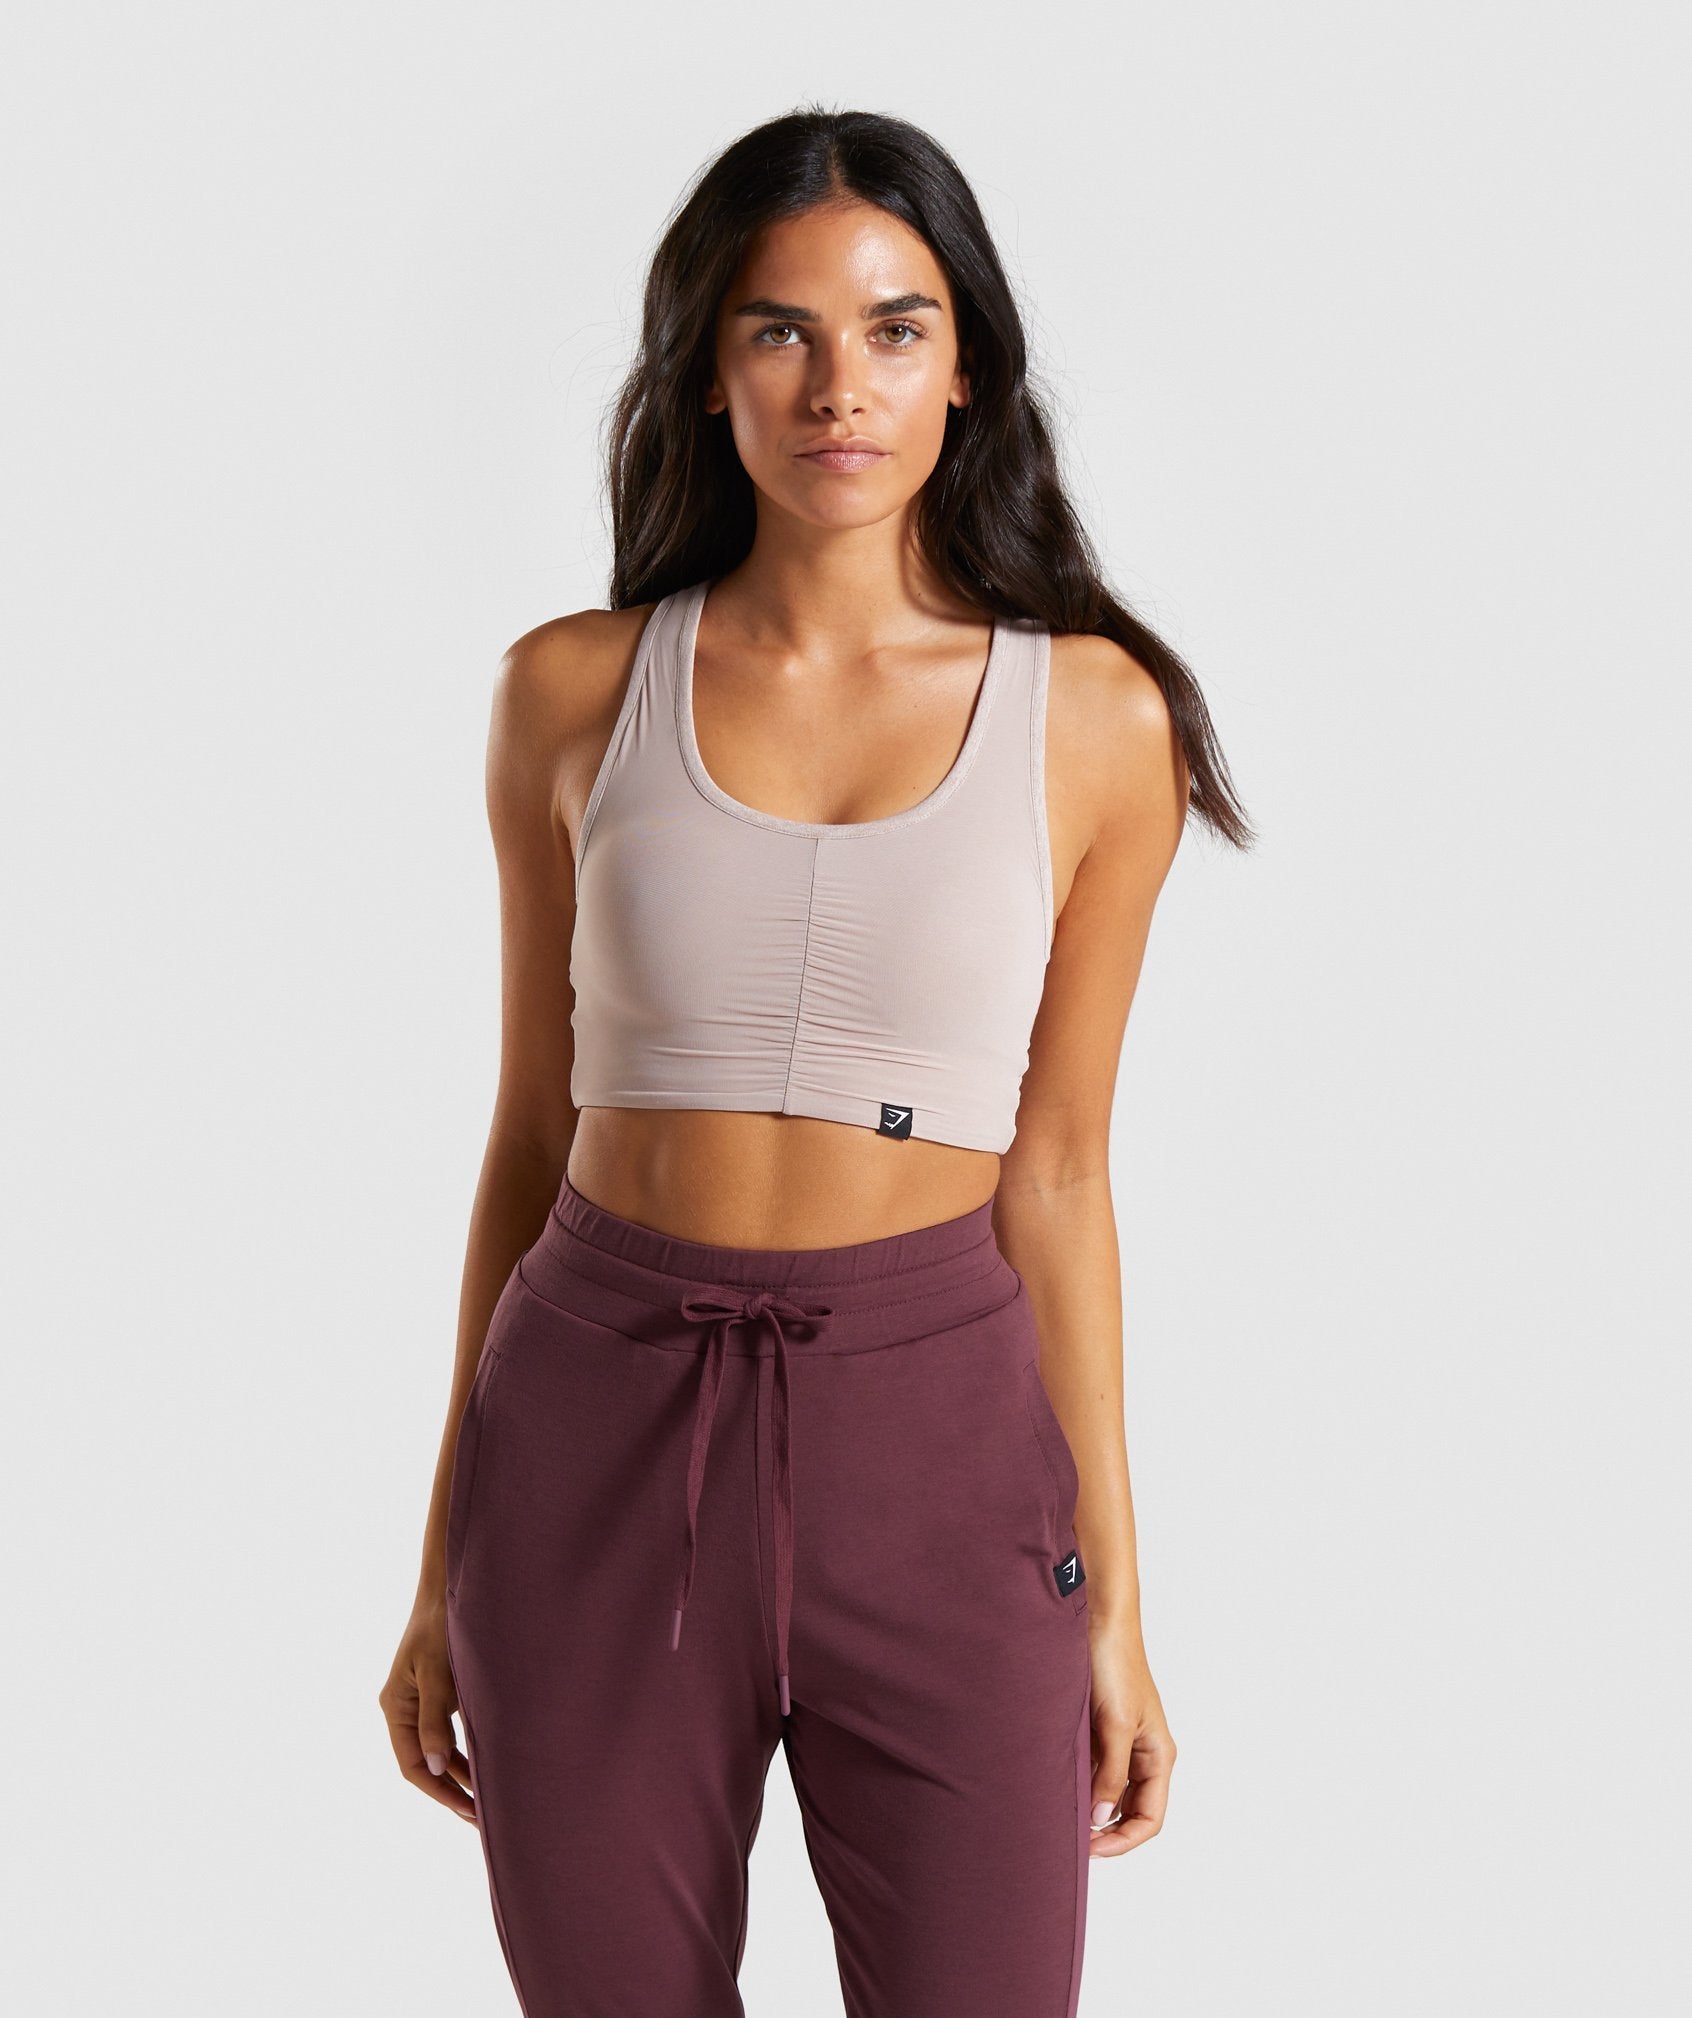 Aura Sports Bra in Taupe - view 1